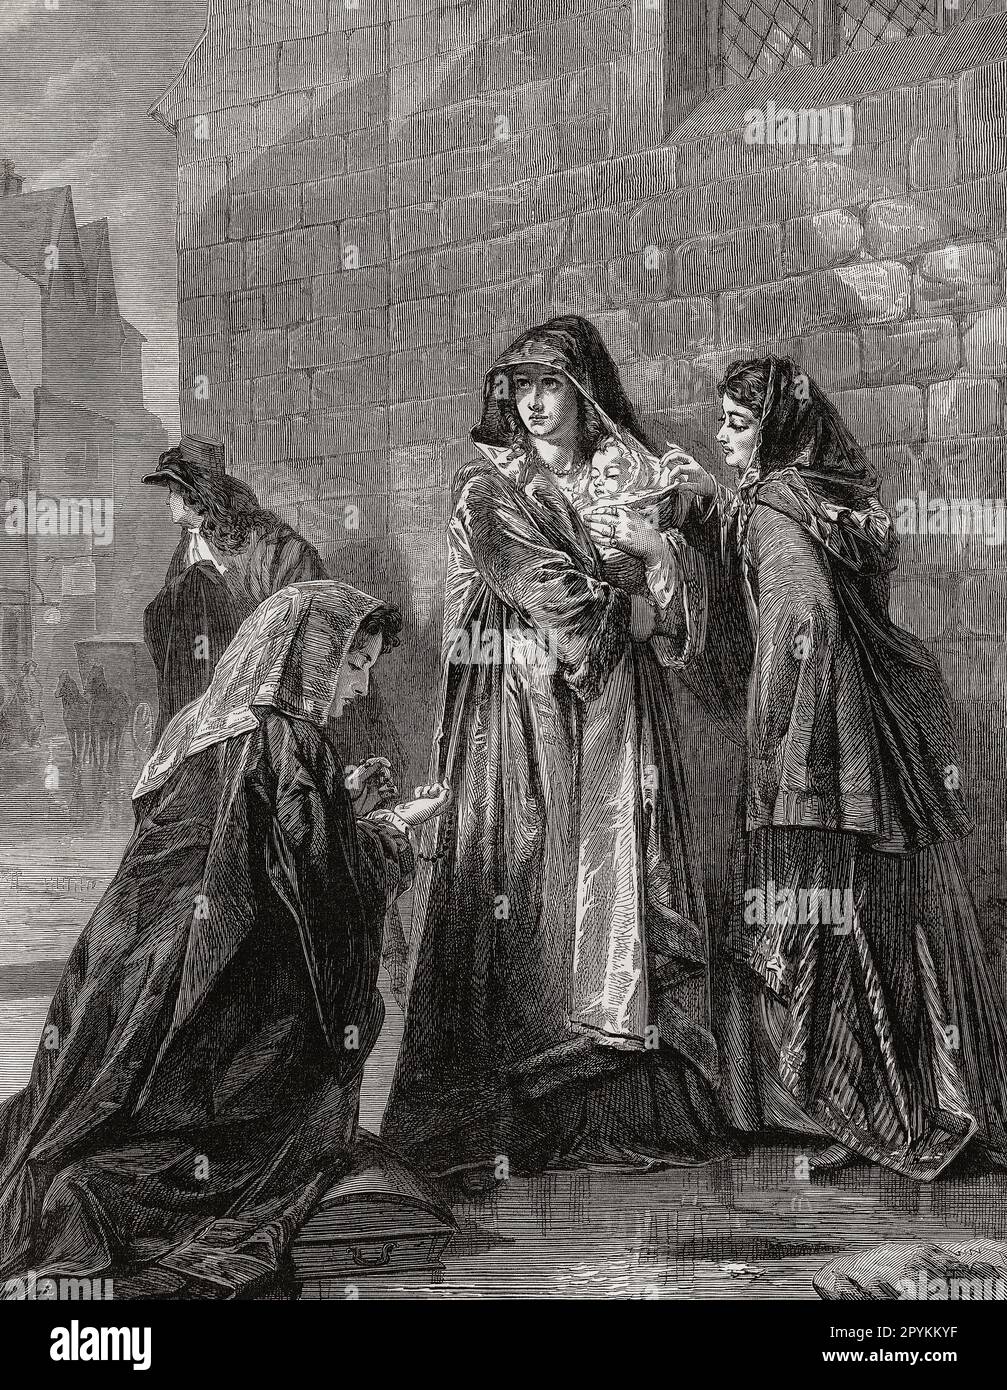 Mary, Queen of James II, with the infant James Francis Edward Stuart, Prince of Wales, leaving England for France in December 1688.   After an illustration in the London Illustrated News, August 3, 1872. Stock Photo